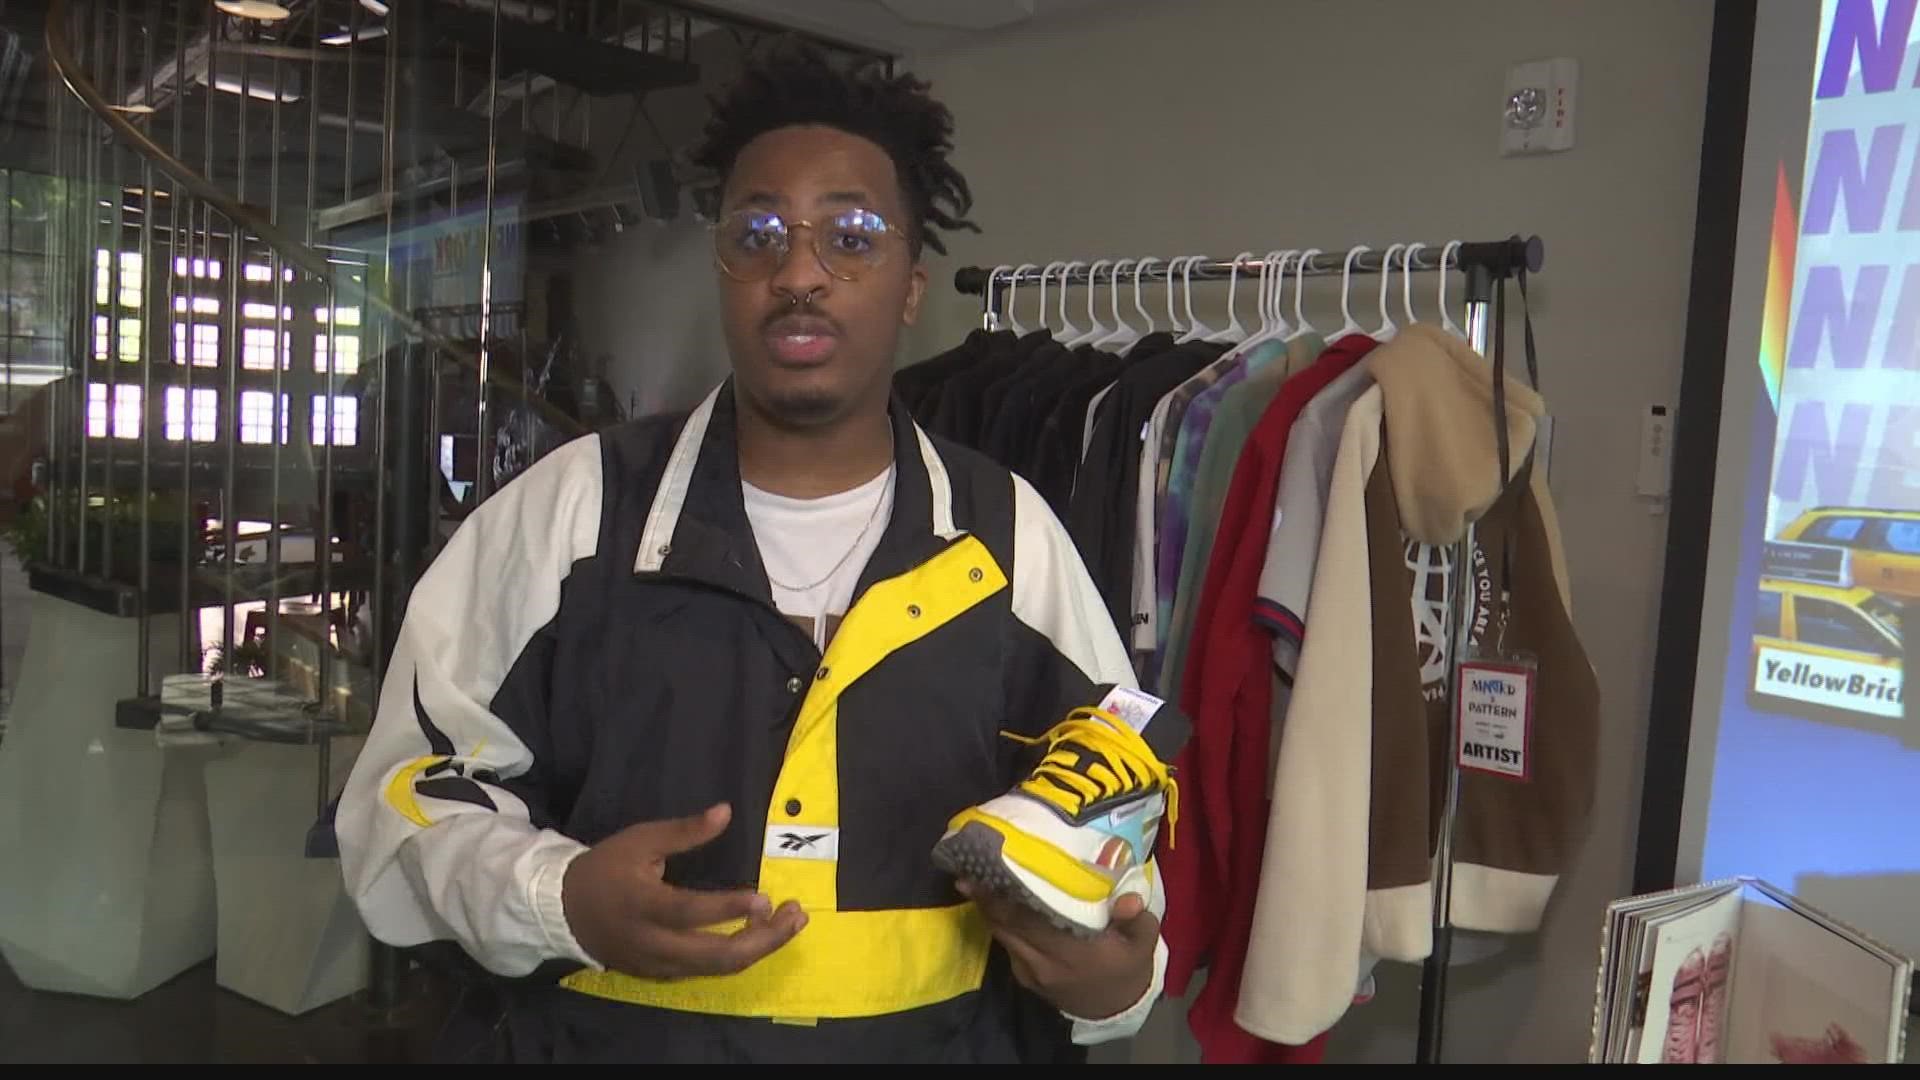 A young creative designer from Lafayette signed up for an online college class called "Sneaker Essentials" last year.